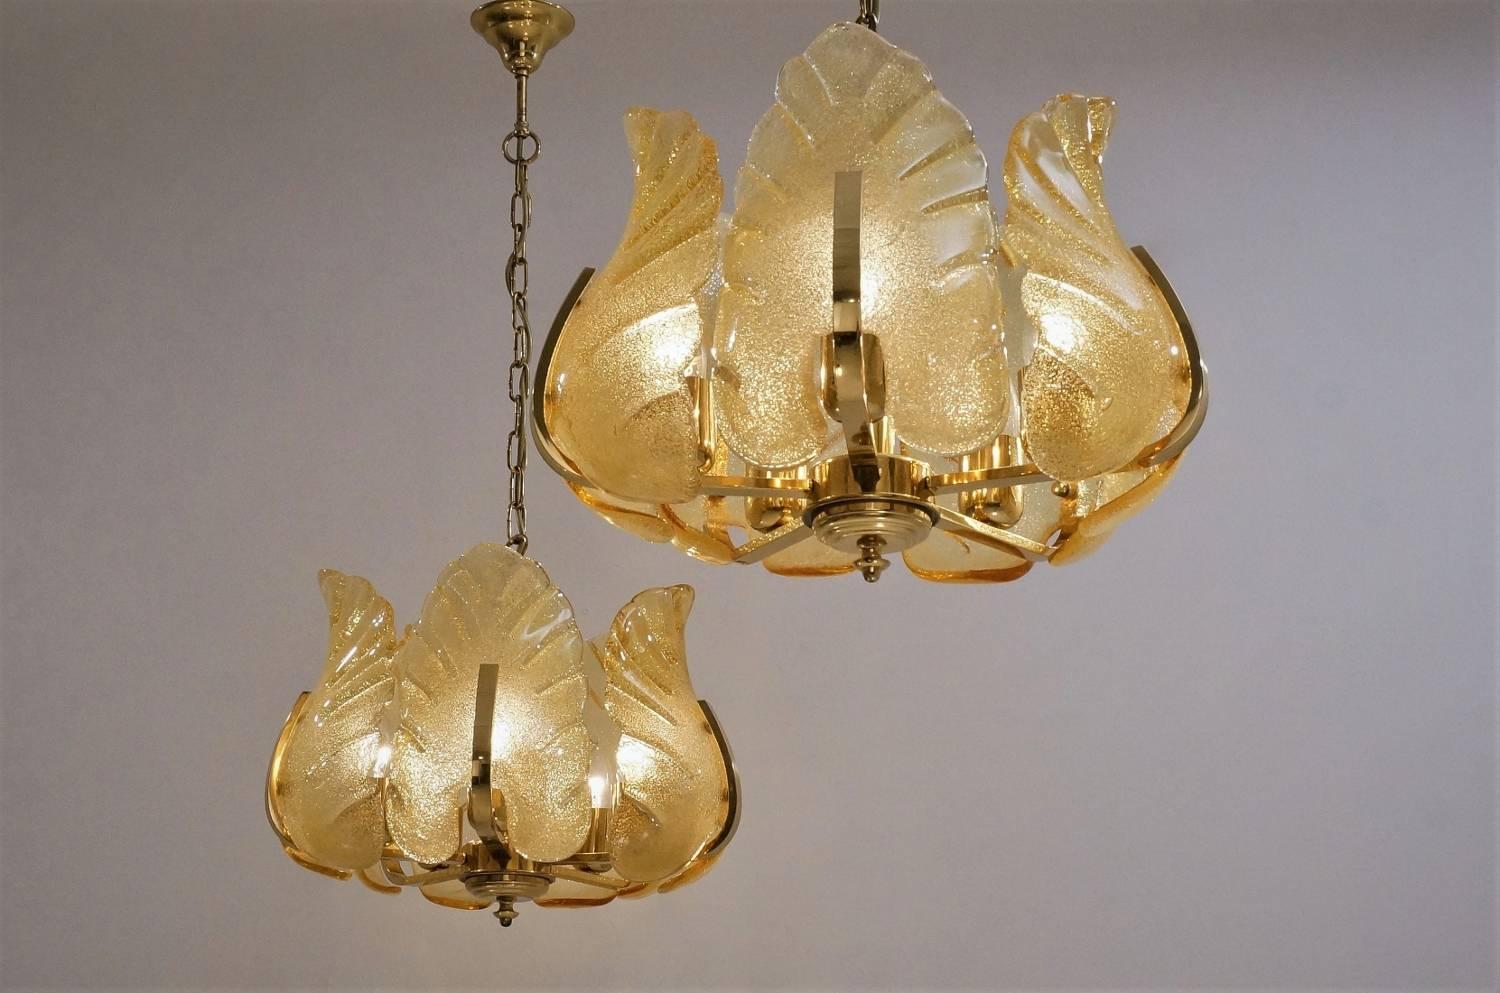 Hollywood Regency Carl Fagerlund Orrefors Chandeliers, a Matching Pair, circa 1960